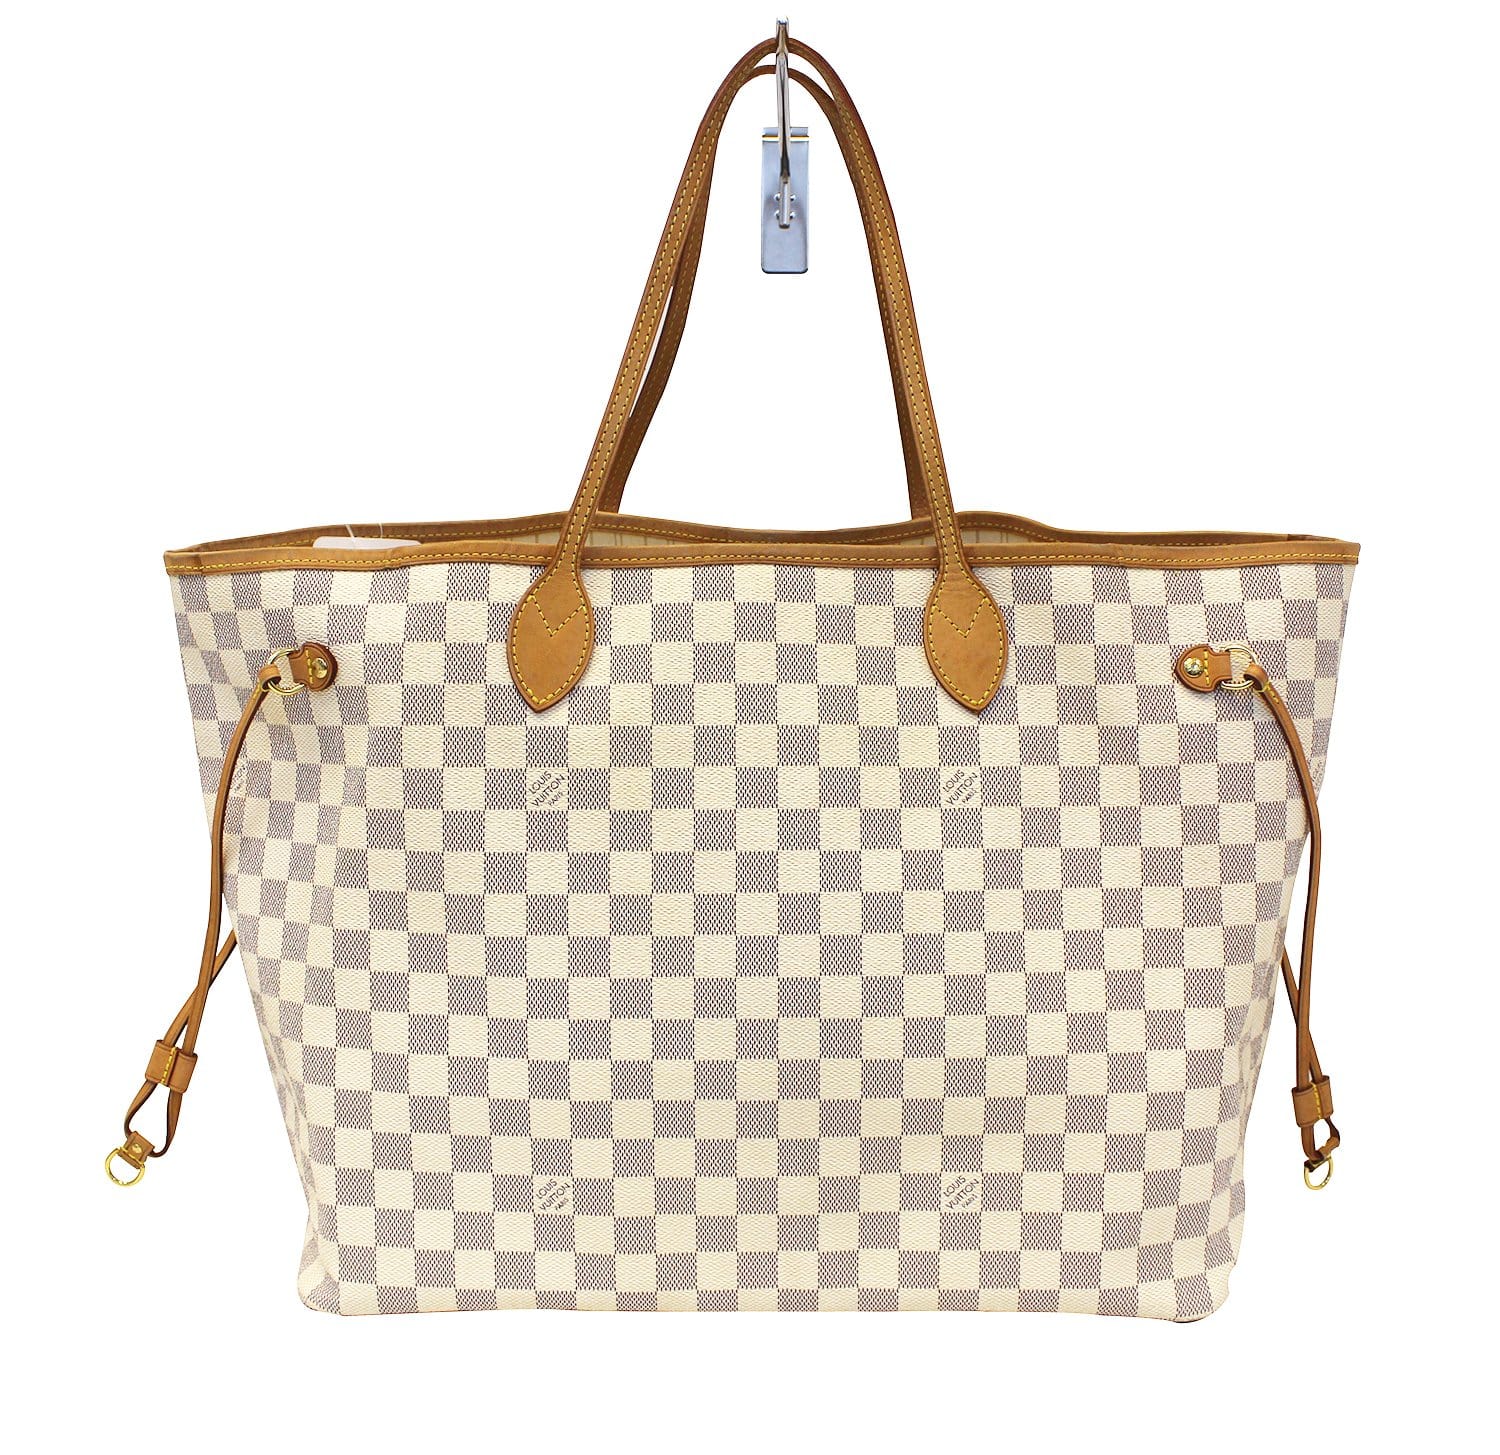 Louis Vuitton Neverfull Bag Gm Damier Azur Purse White Leather and